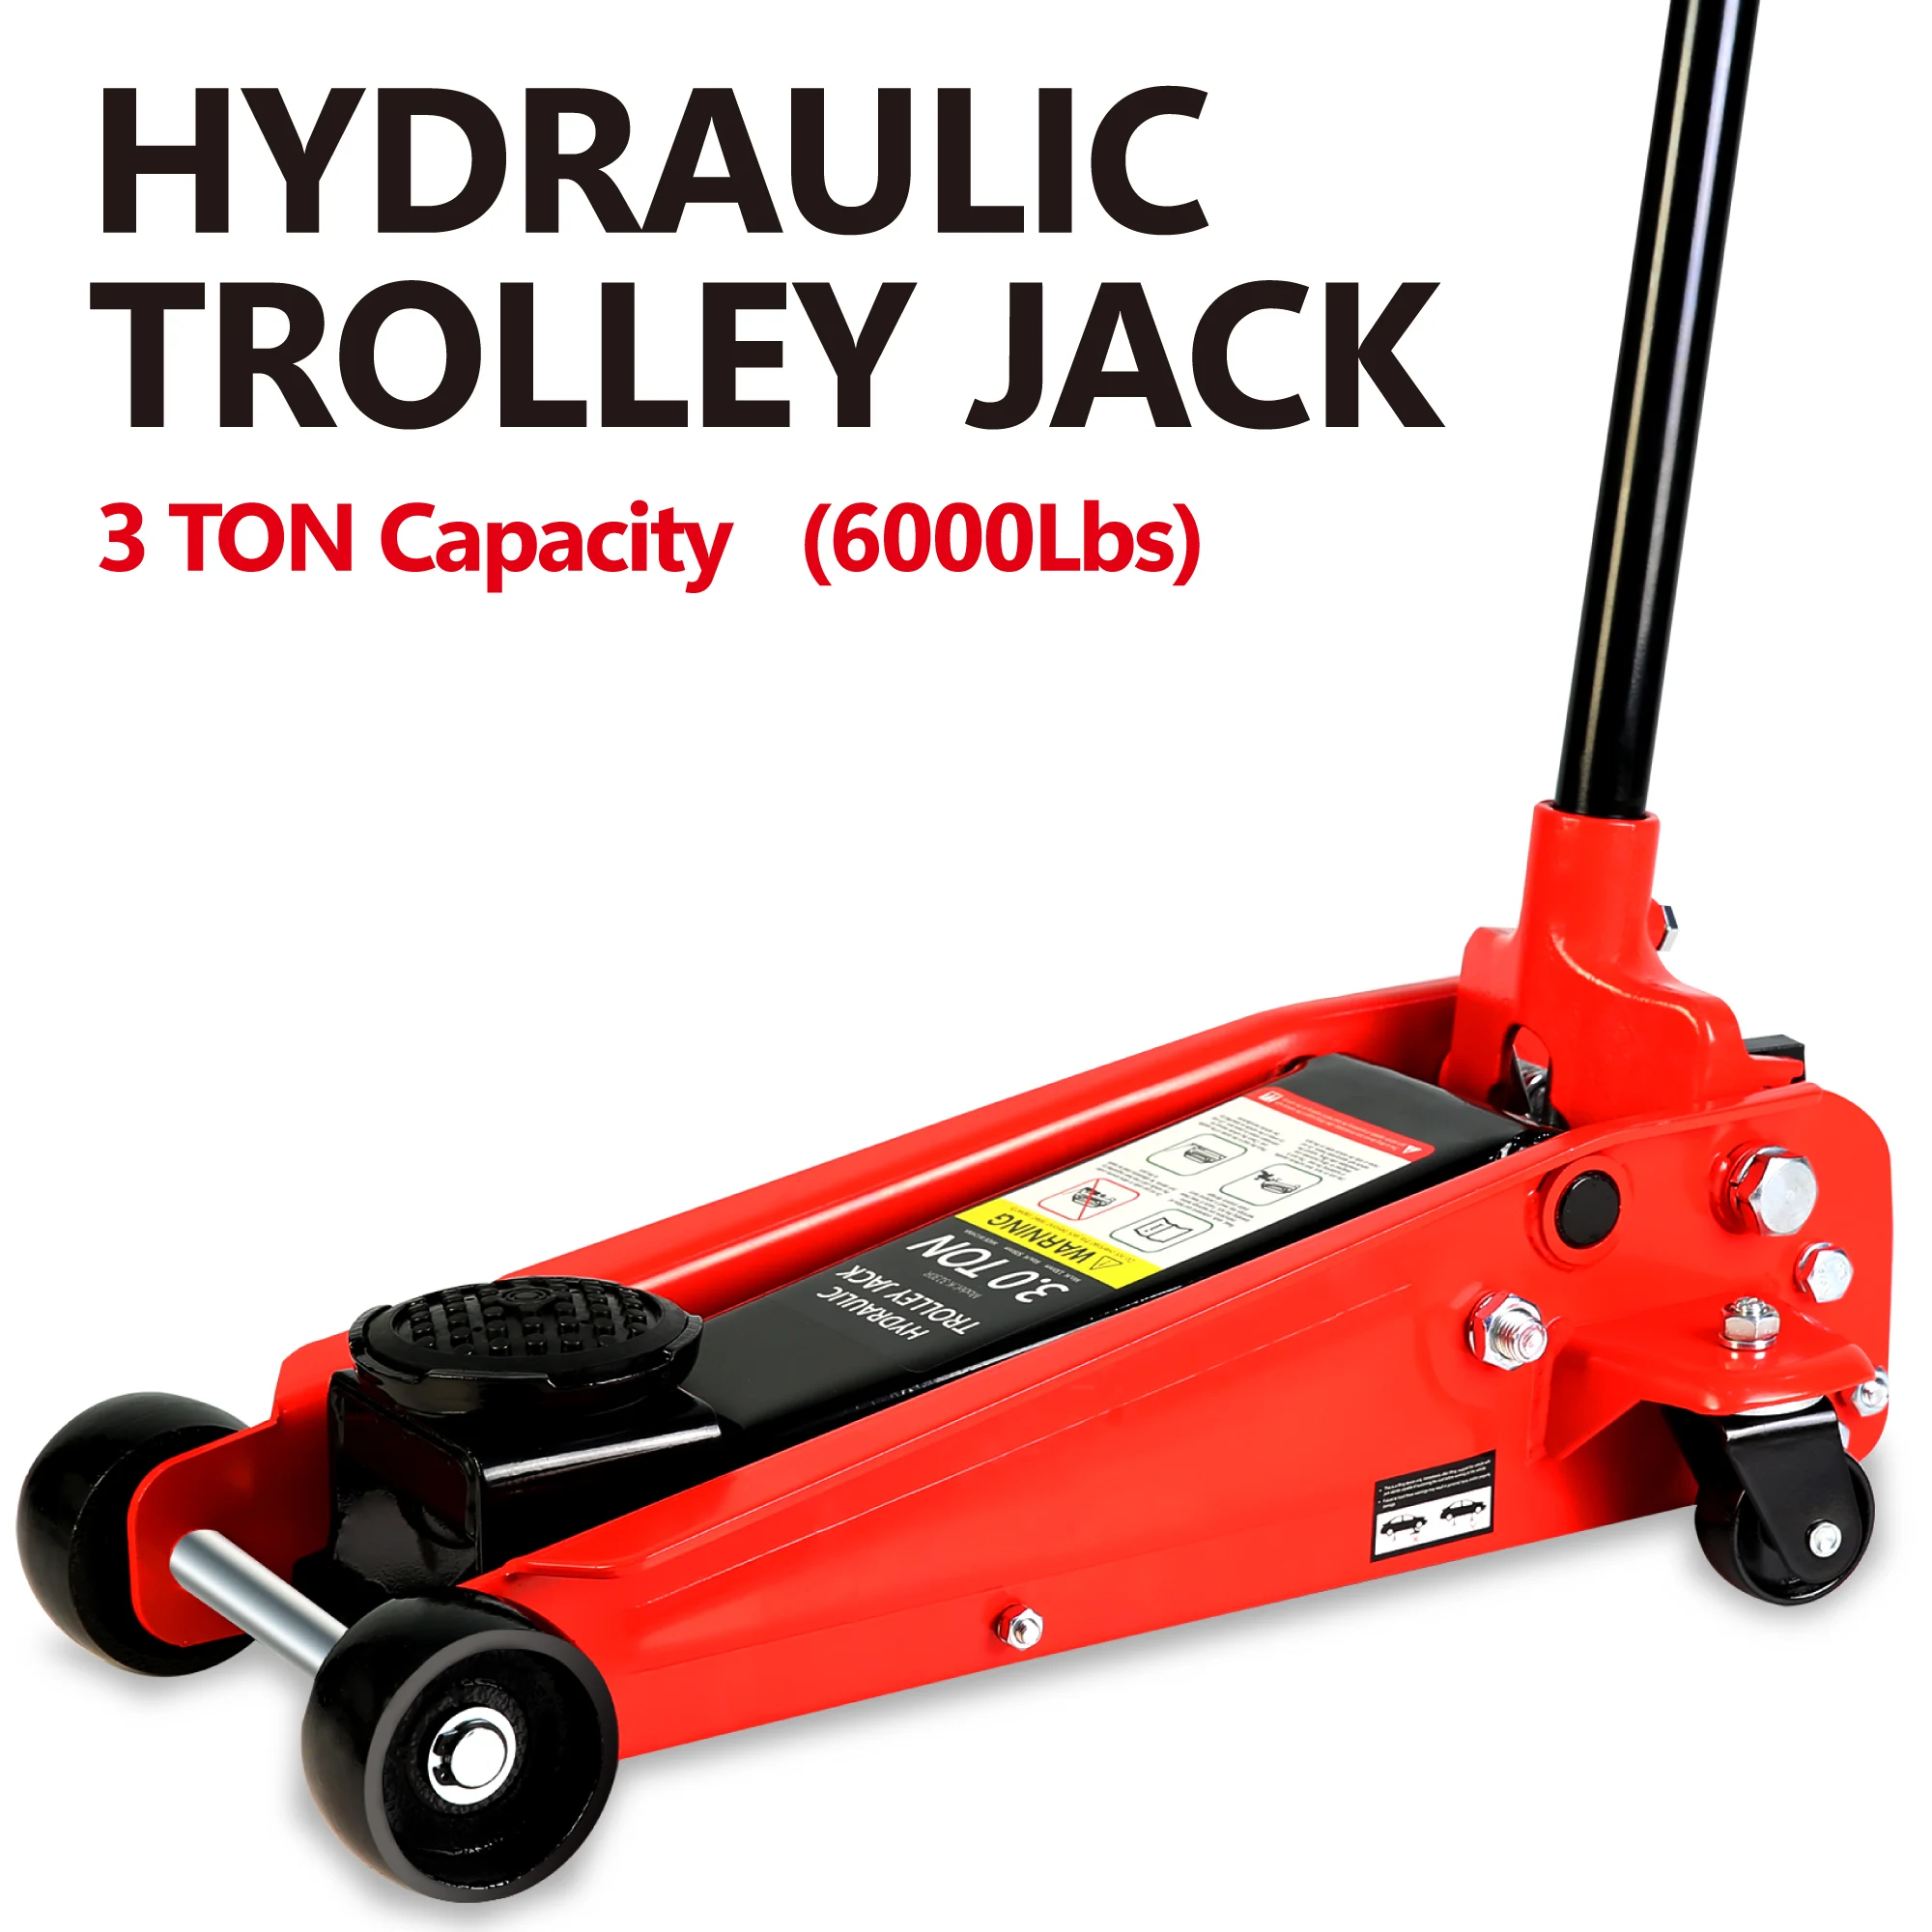 

Hydraulic trolley Low Profile and Steel Racing Floor Jack with Piston Quick Lift Pump, 3Ton (6,000 lb) Capacity